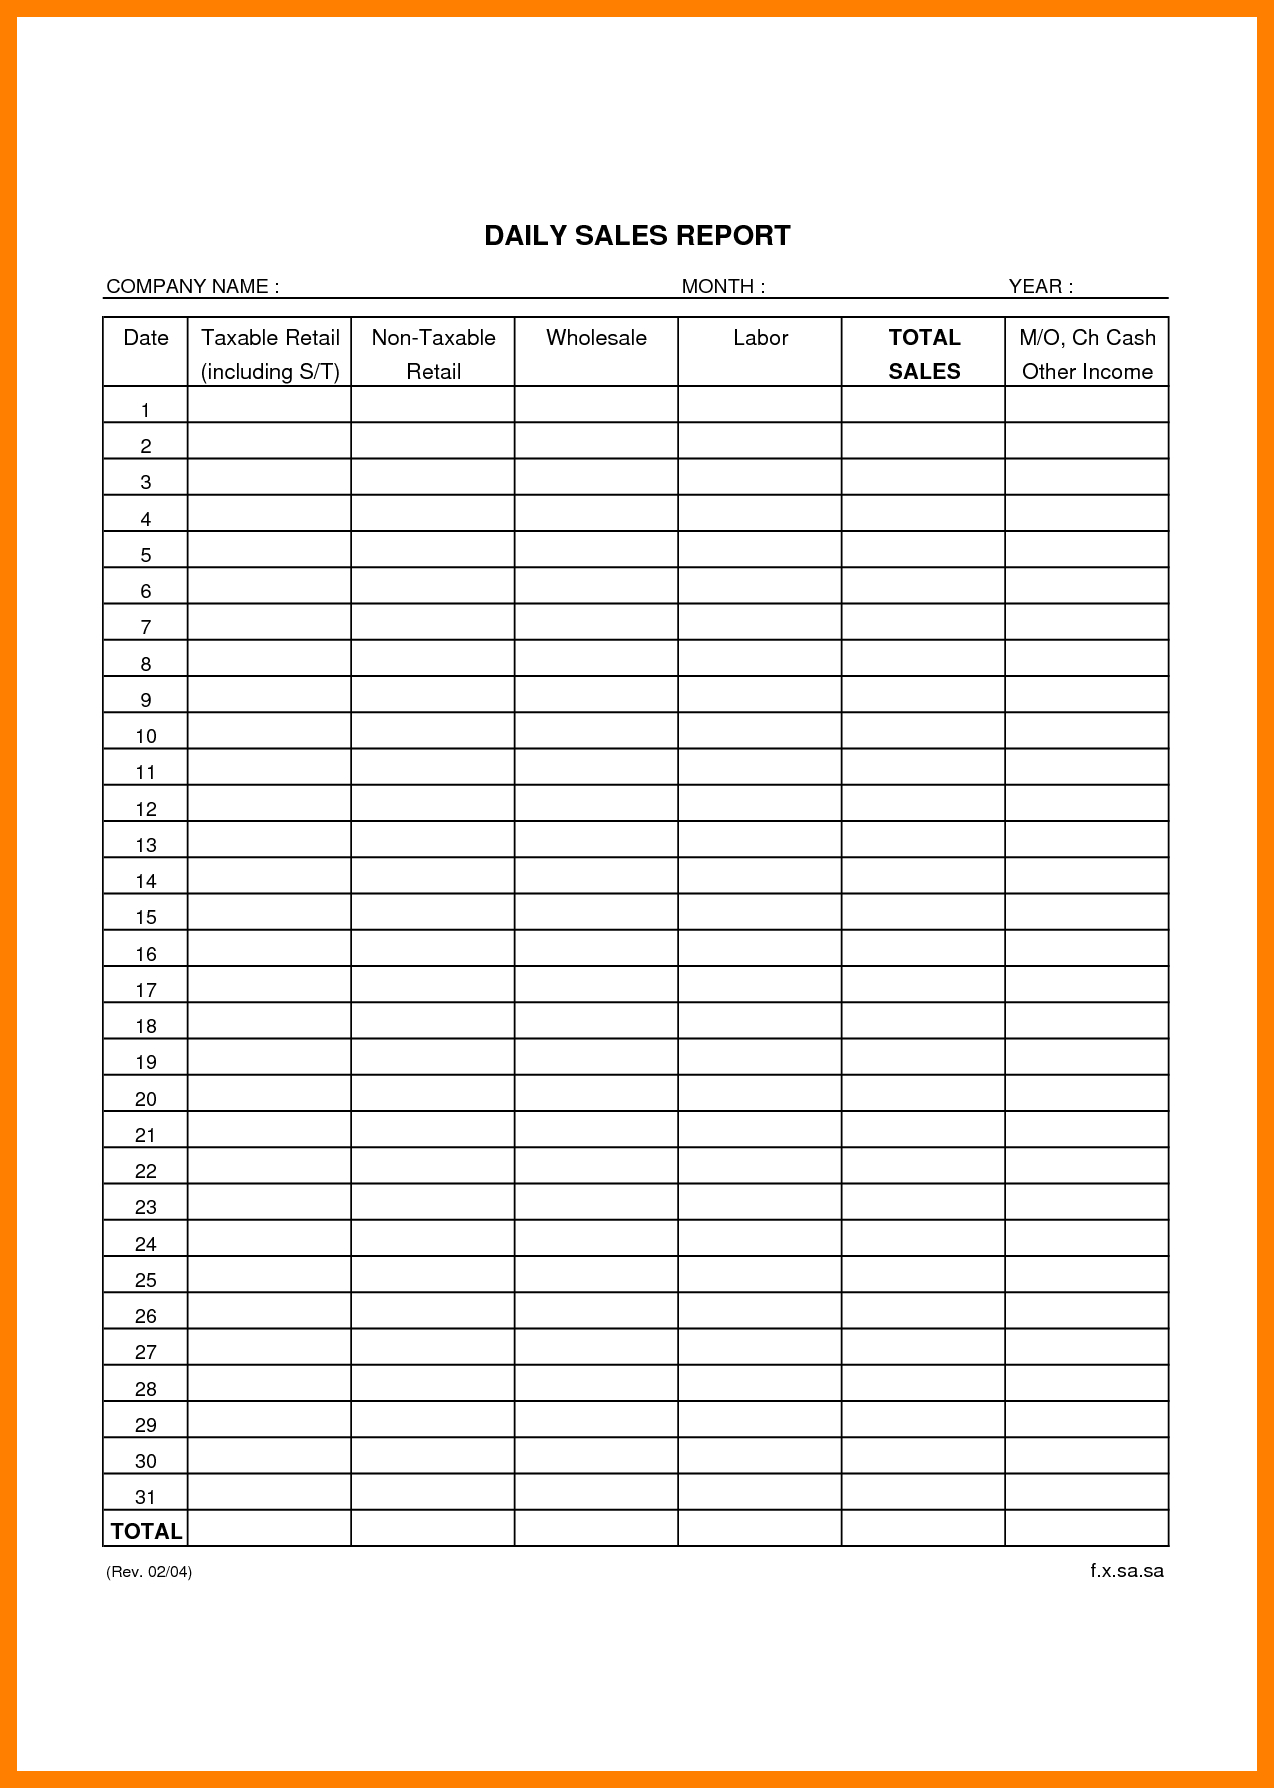 Excel Sales Report Template Free Download – Atlantaauctionco In Free Daily Sales Report Excel Template